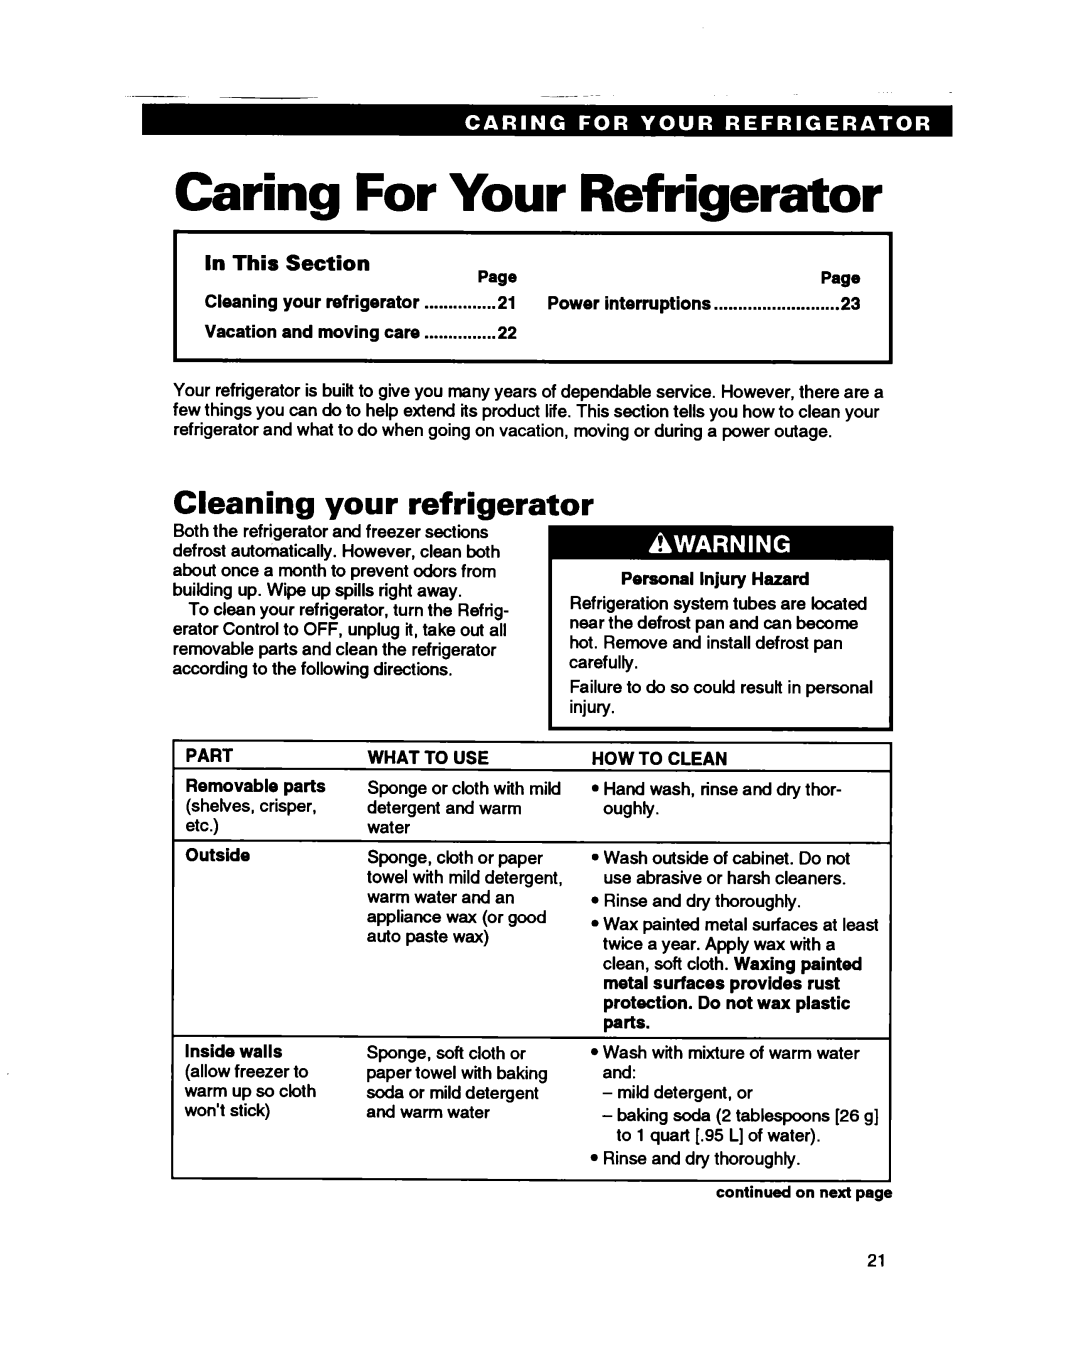 Whirlpool ED22PB Caring For Your Refrigerator, Cleaning your refrigerator, I In This Section, Page, Personal injury Hazard 